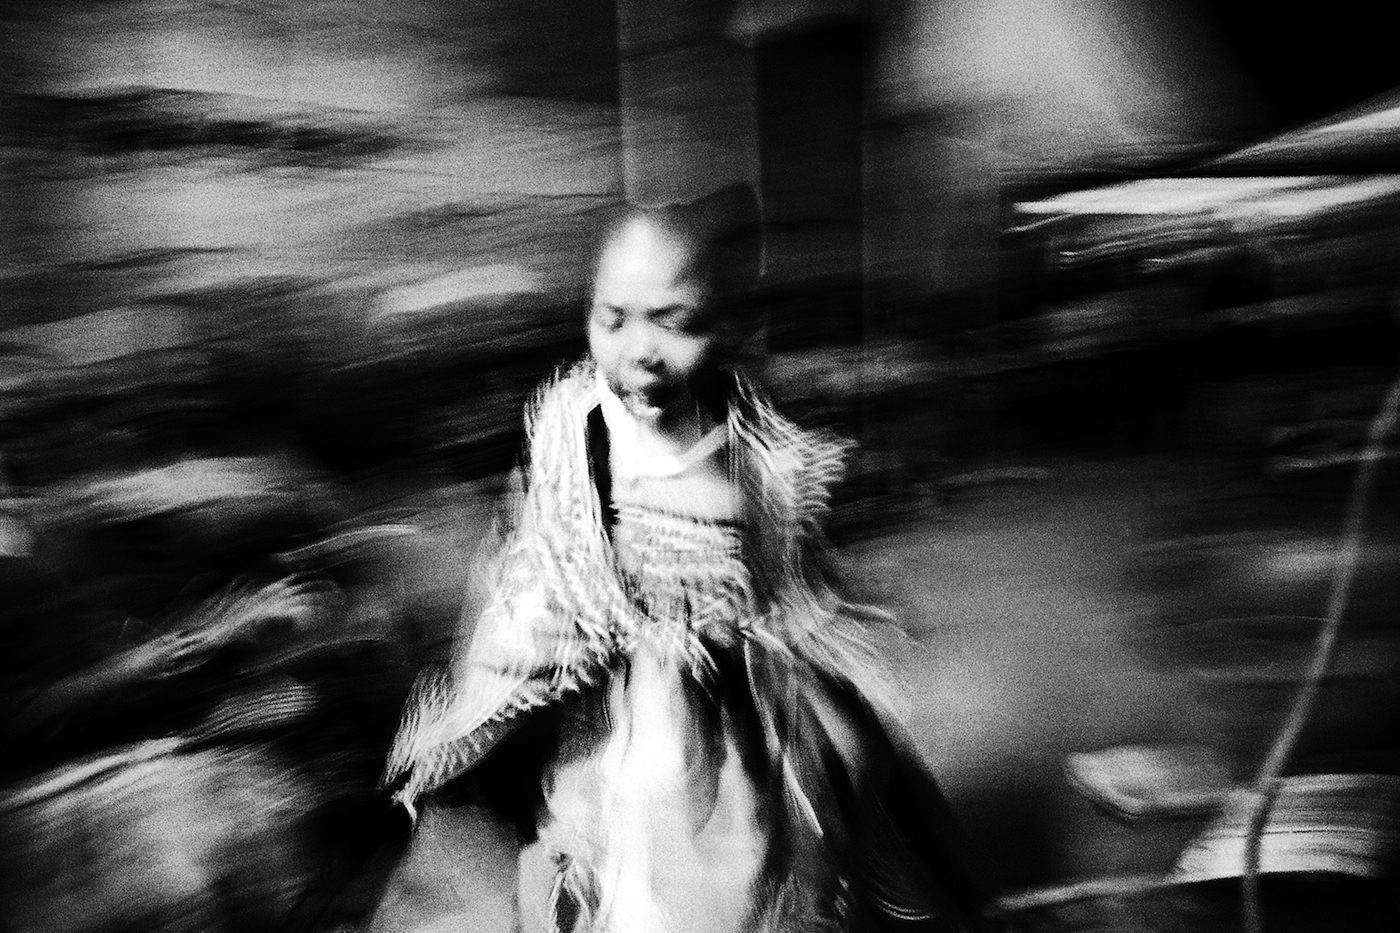 Andrew Tshabangu, Portrait of a Young Thwasa, from the series Bridges, 2008. Courtesy the artist and Gallery MOMO